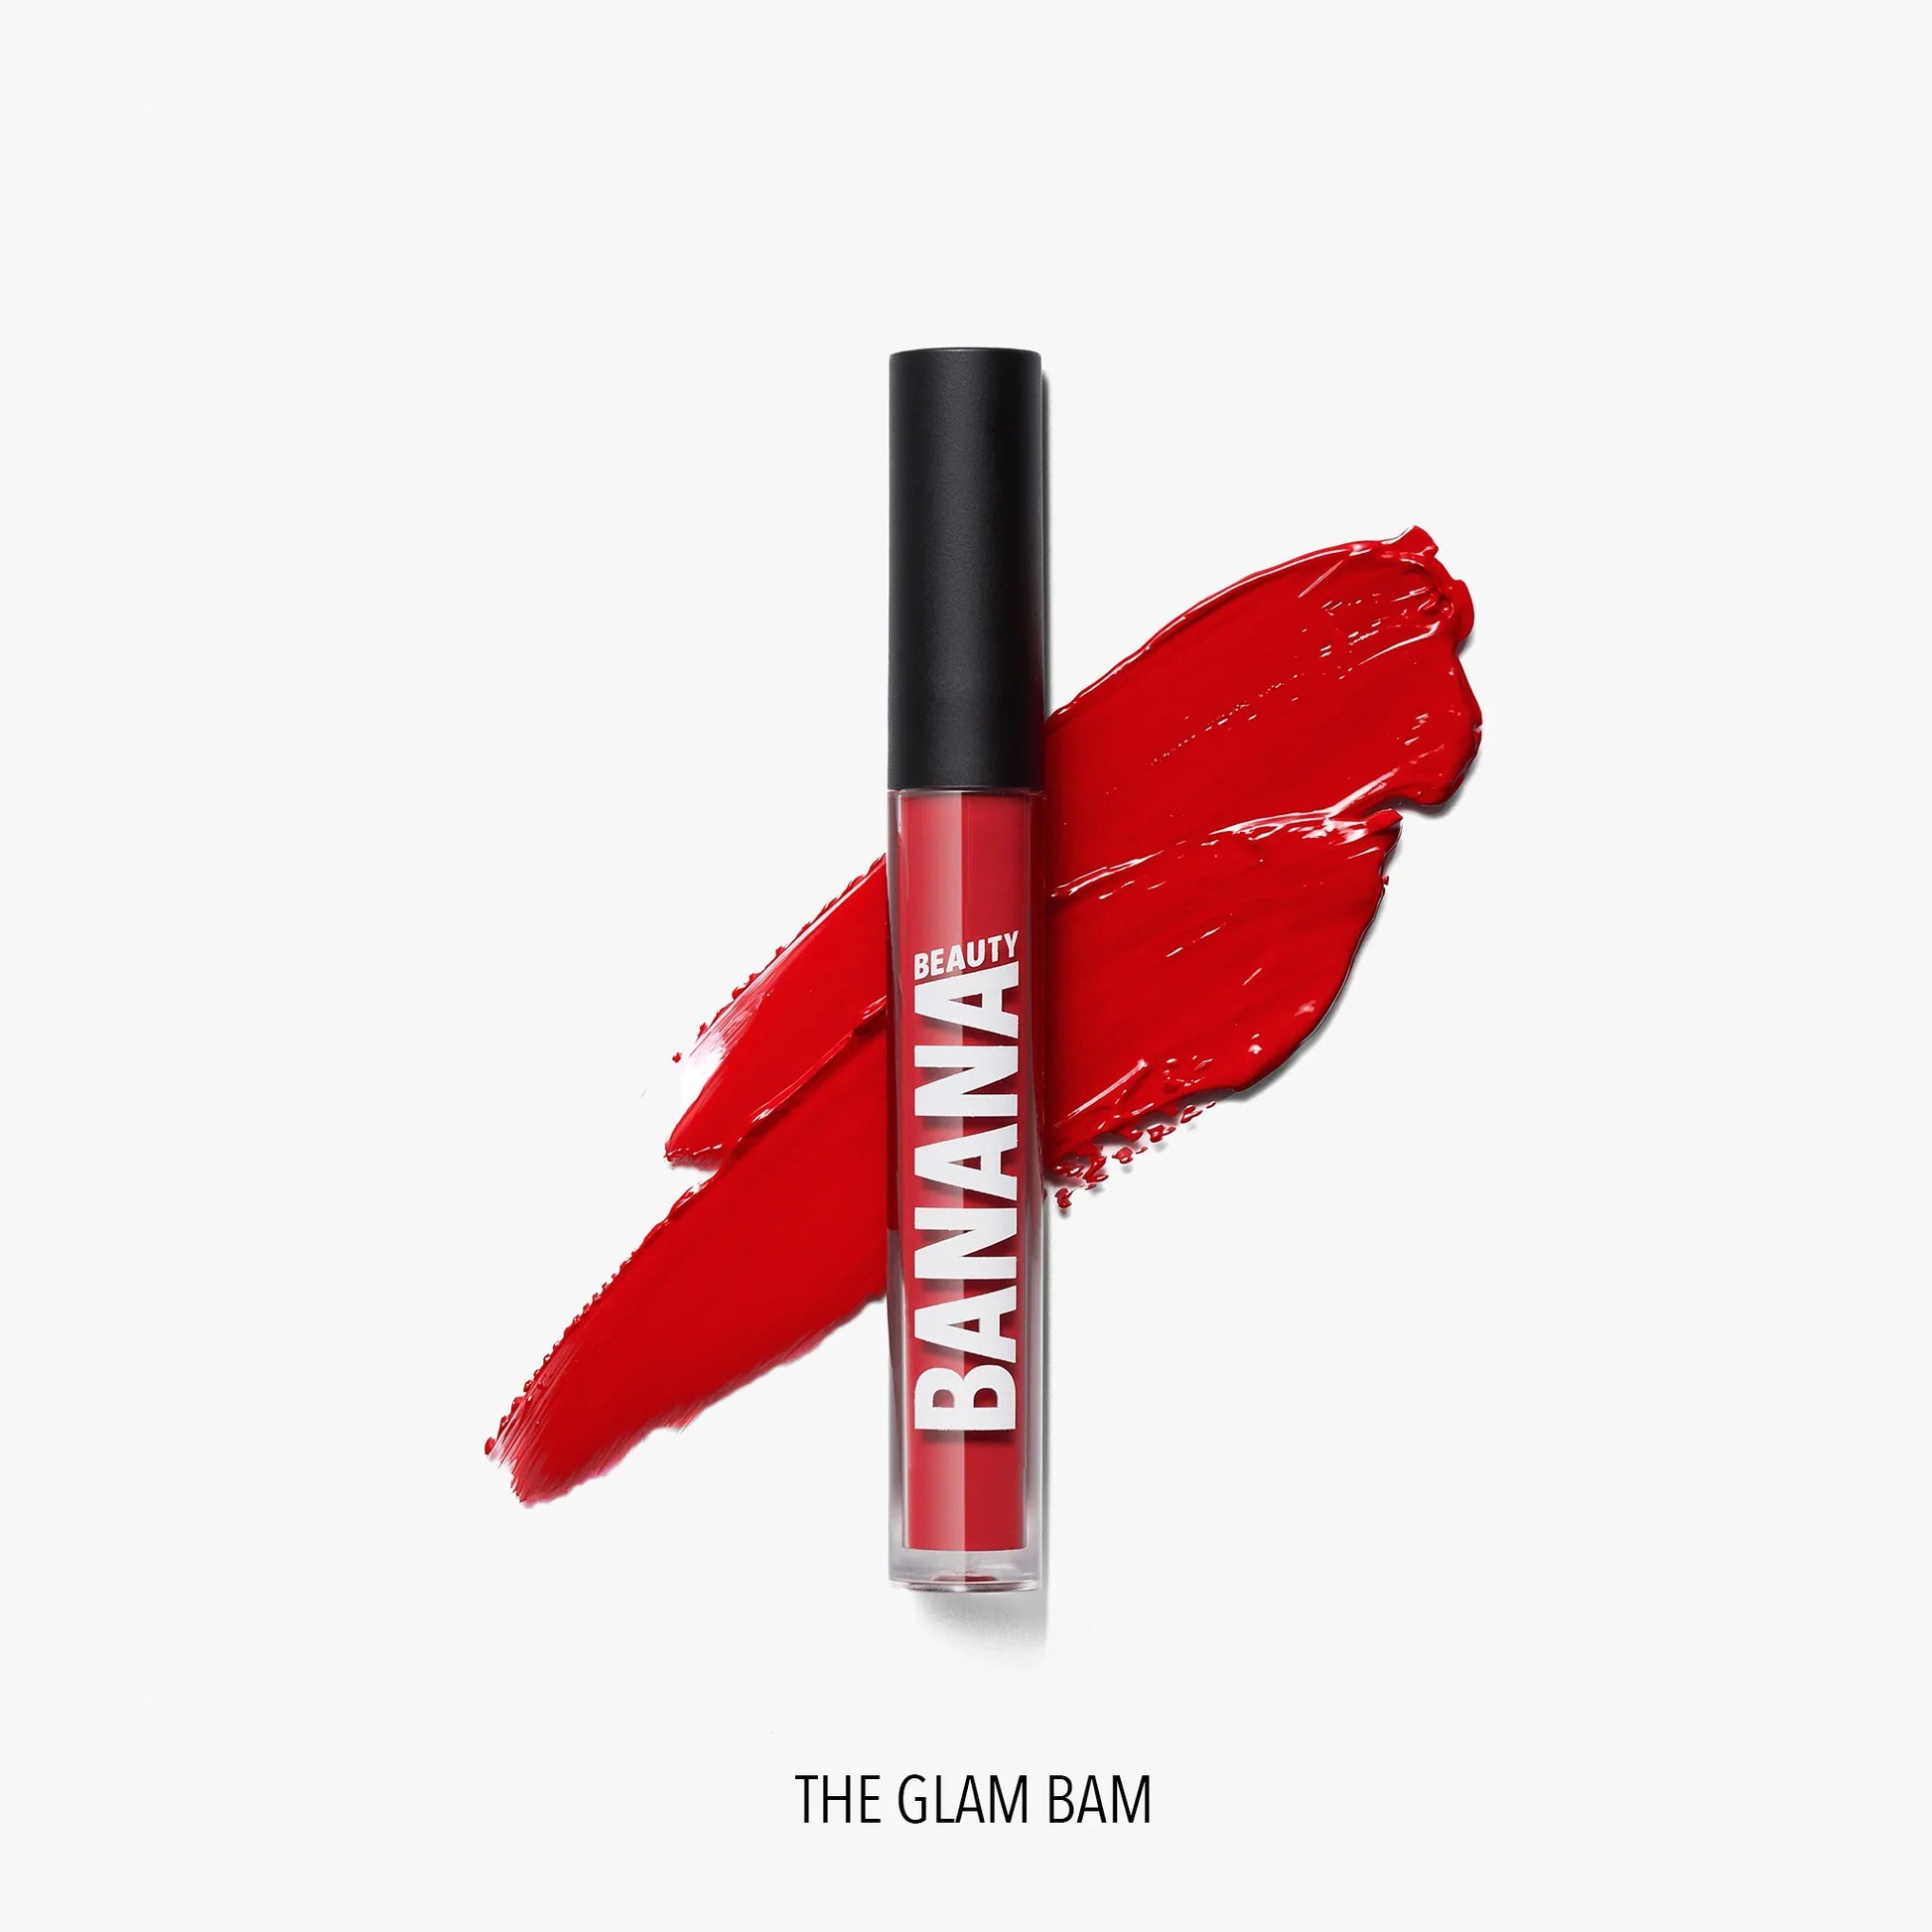 The Glam Bam